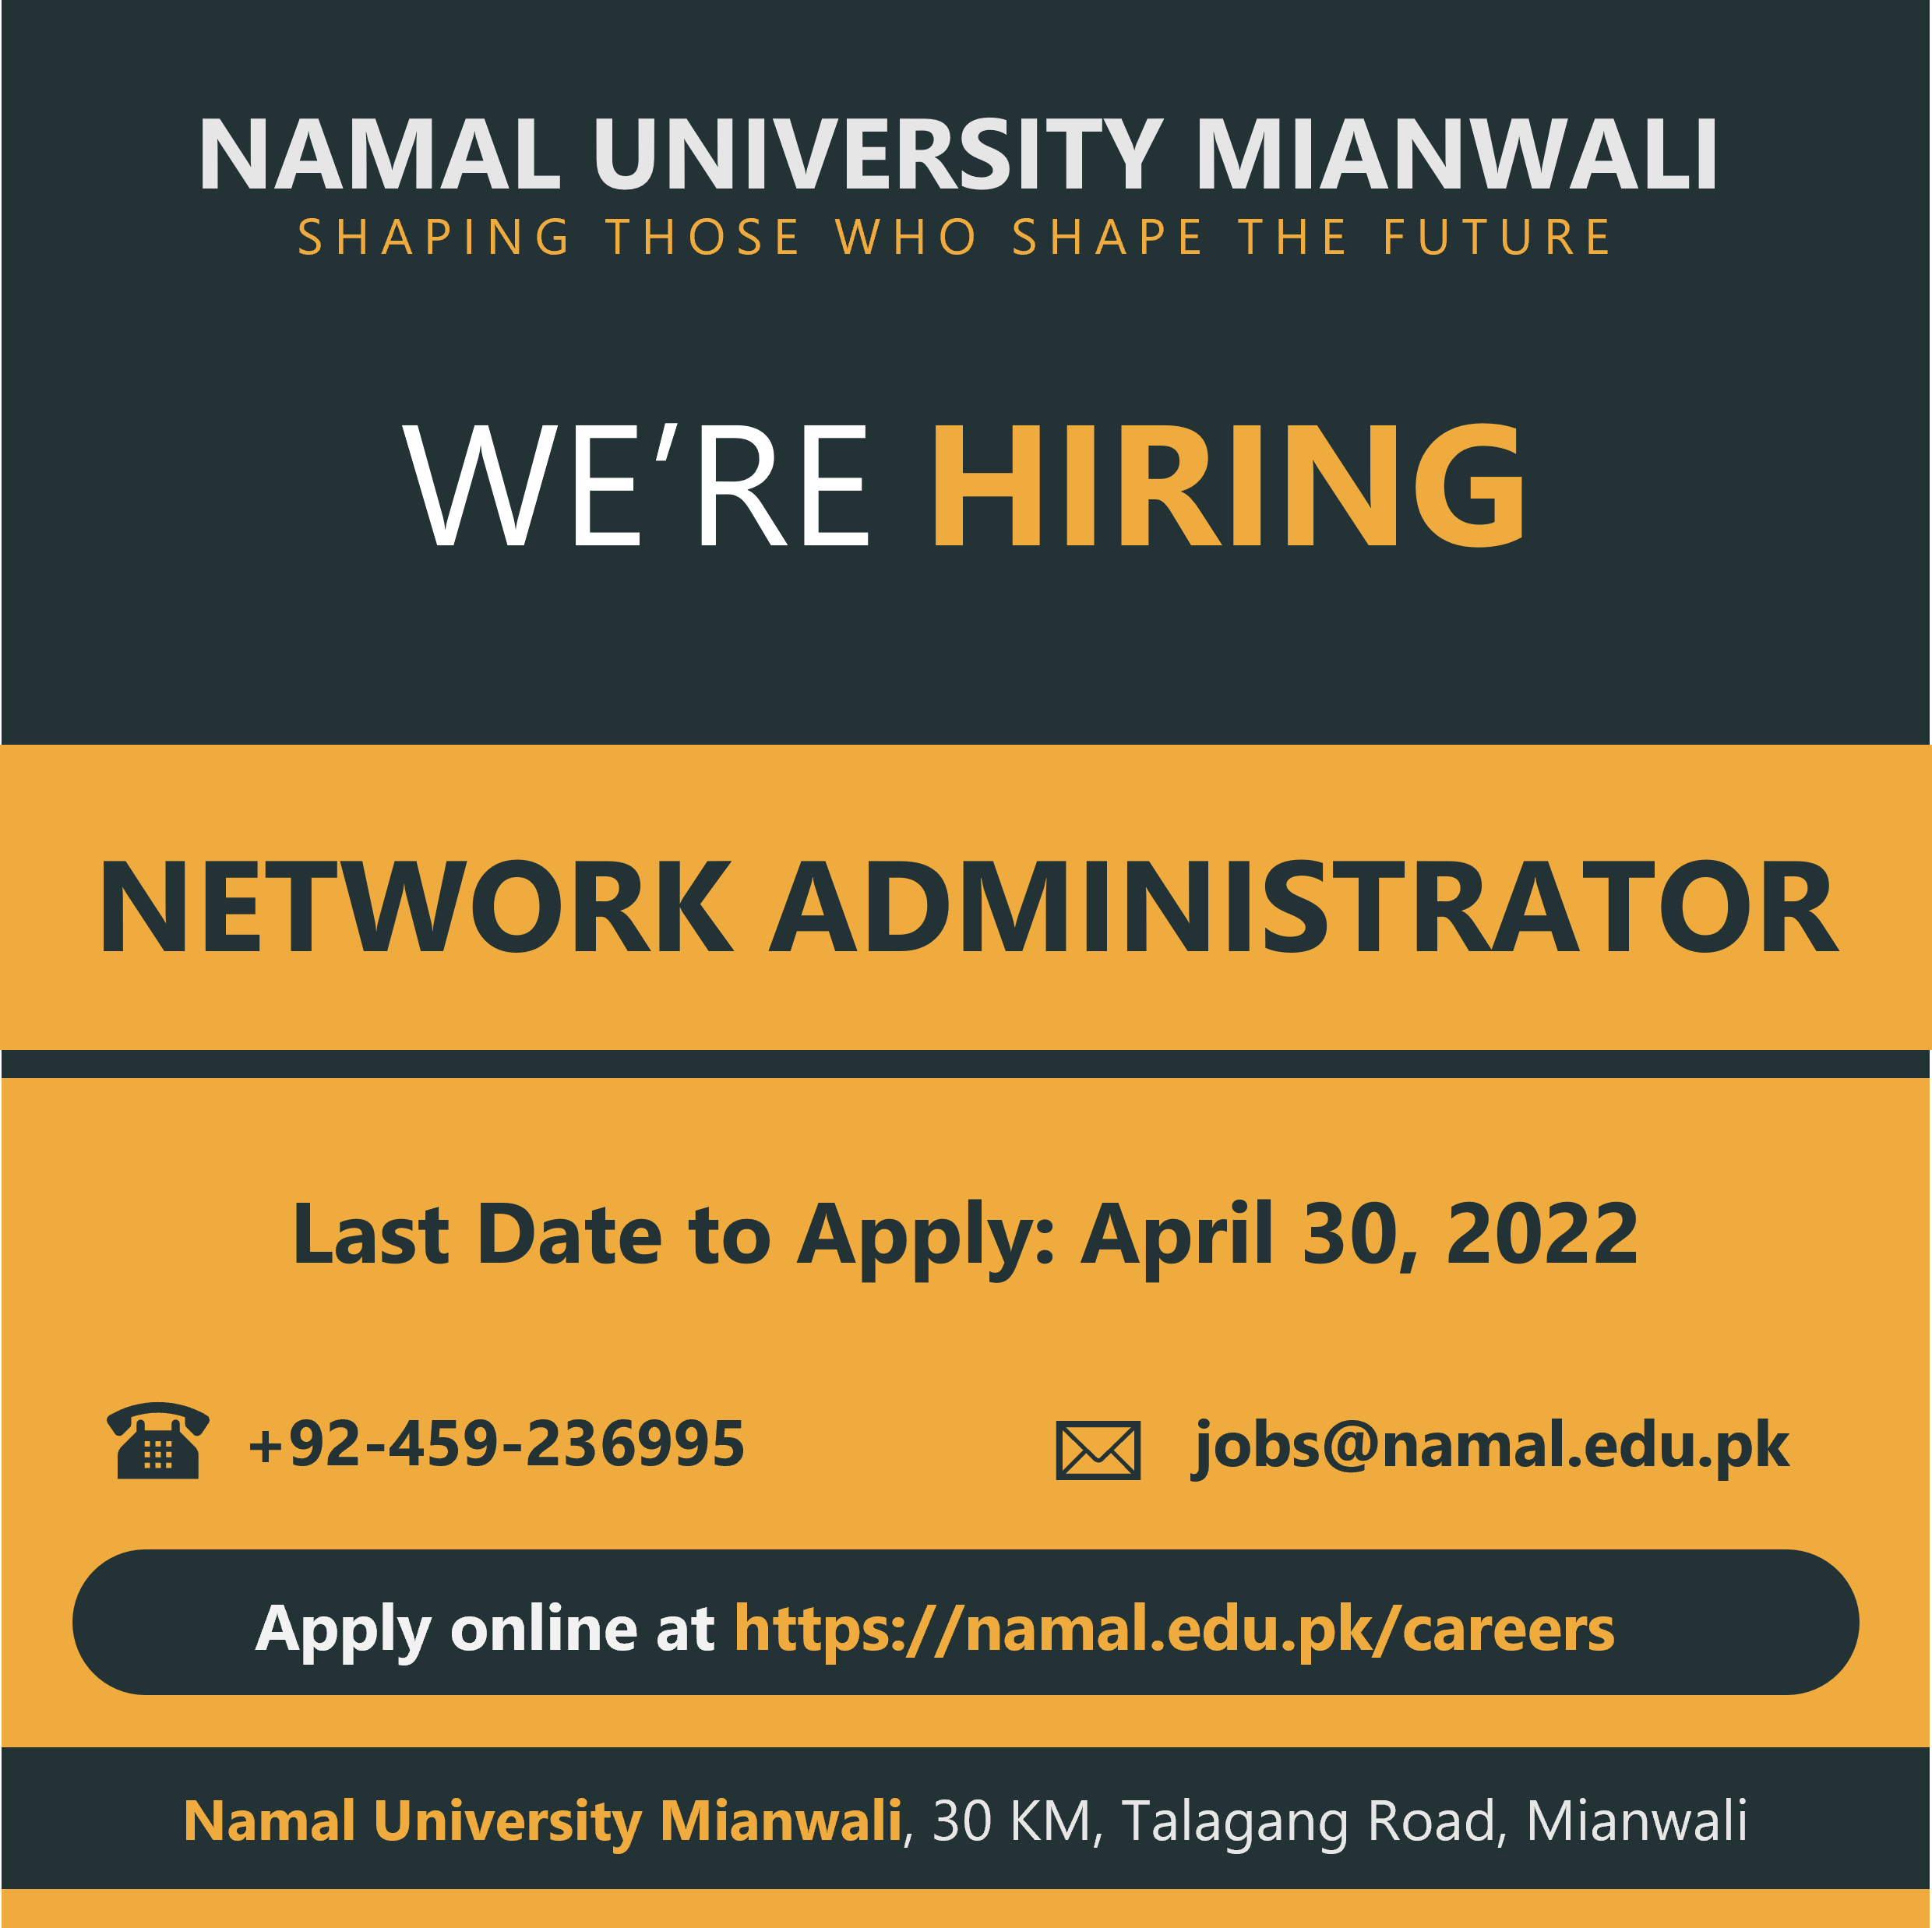 We are hiring!! NETWORK ADMINISTRATOR